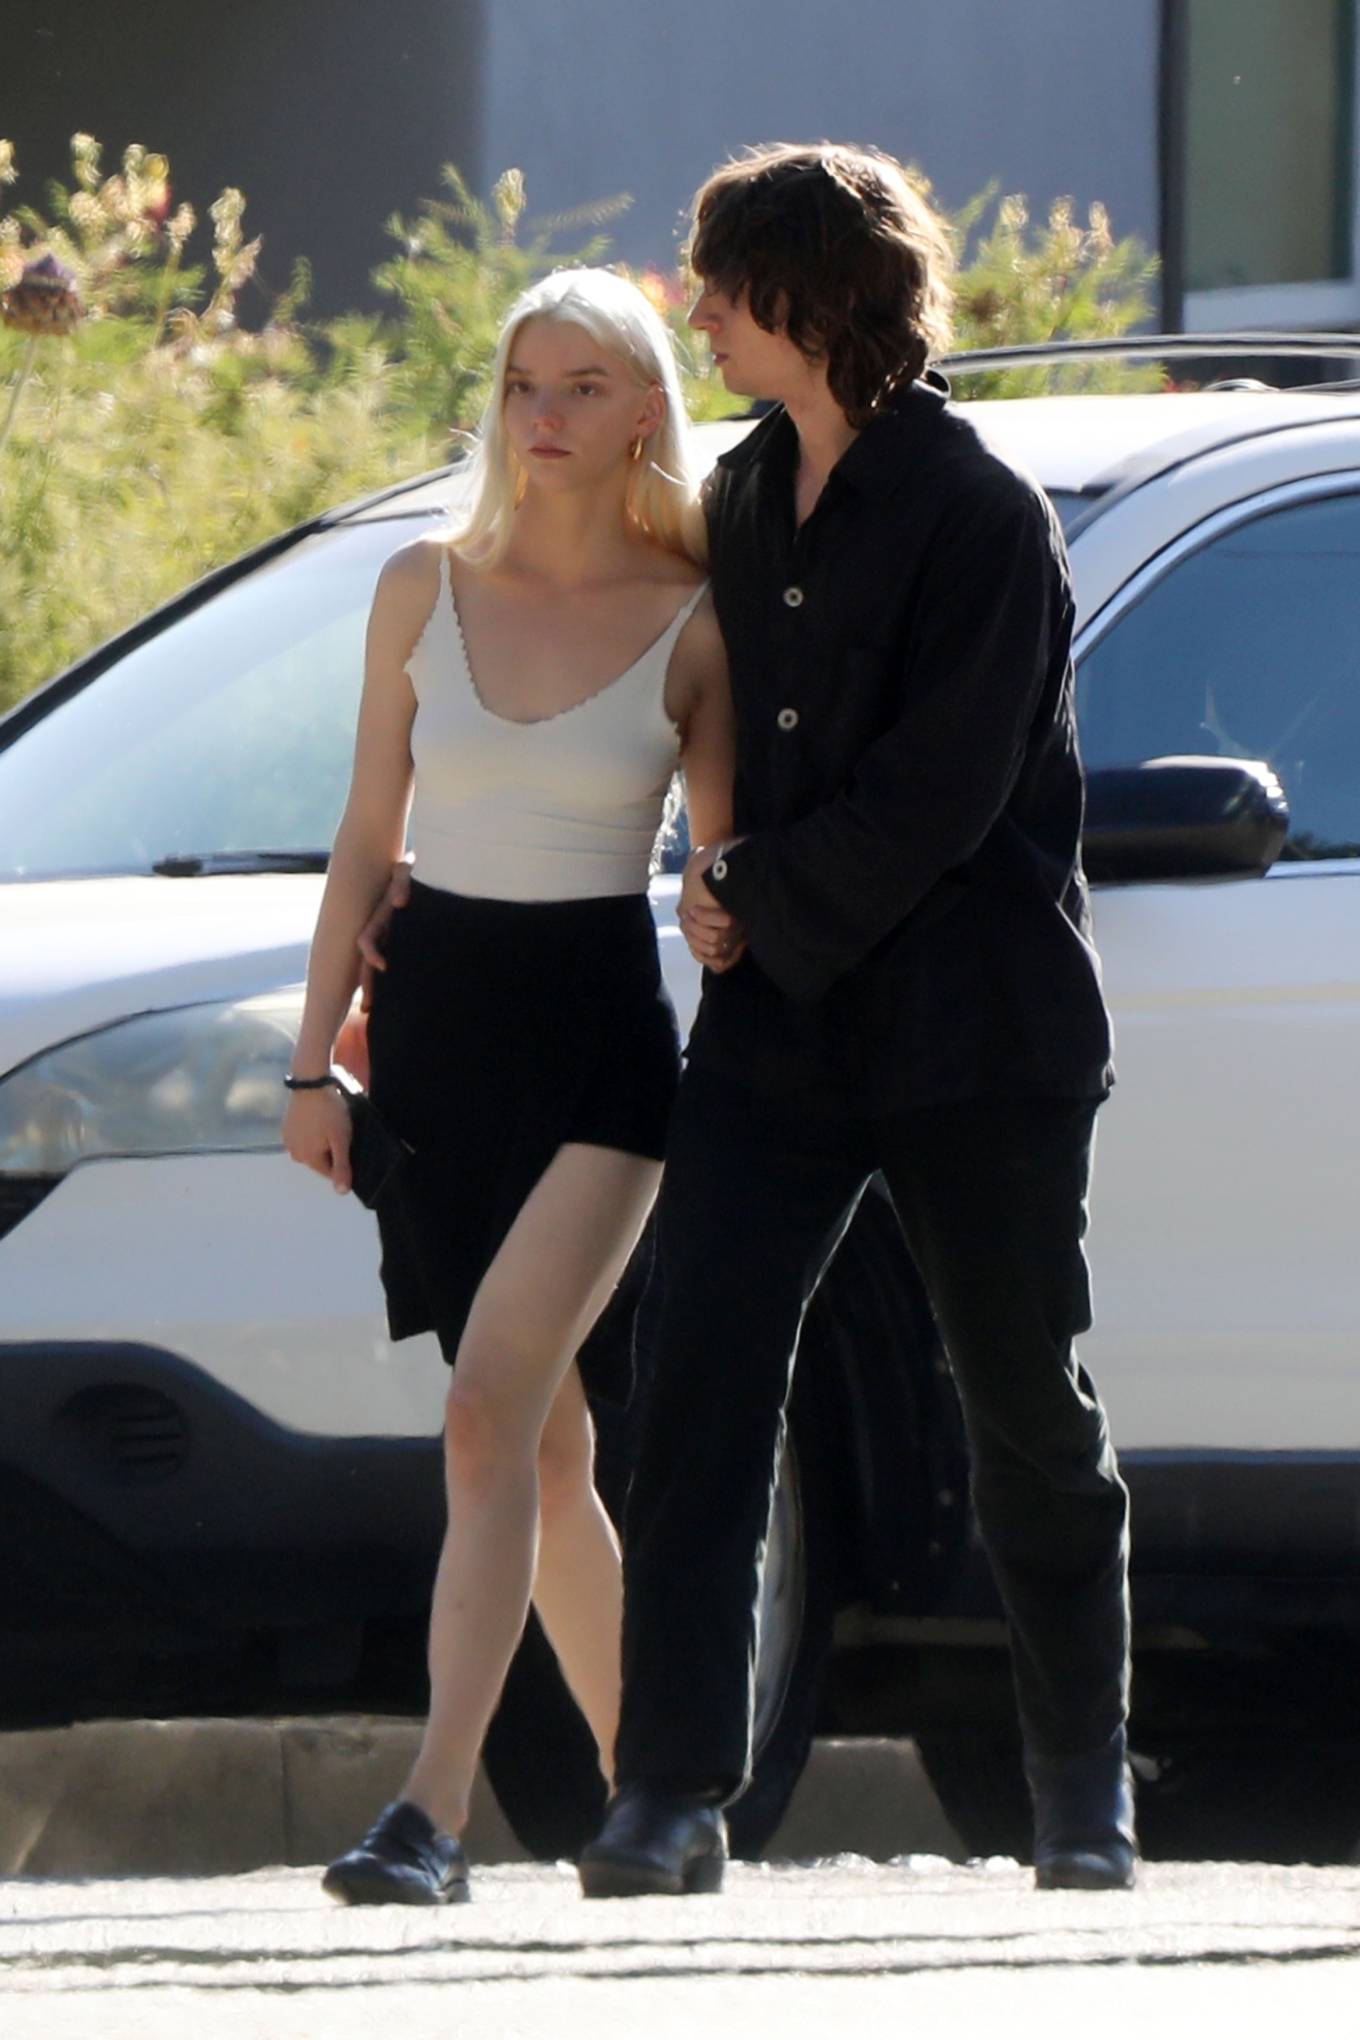 Anya Taylor Joy - With husband Malcolm McRae seen carrying guitars in Los Angeles